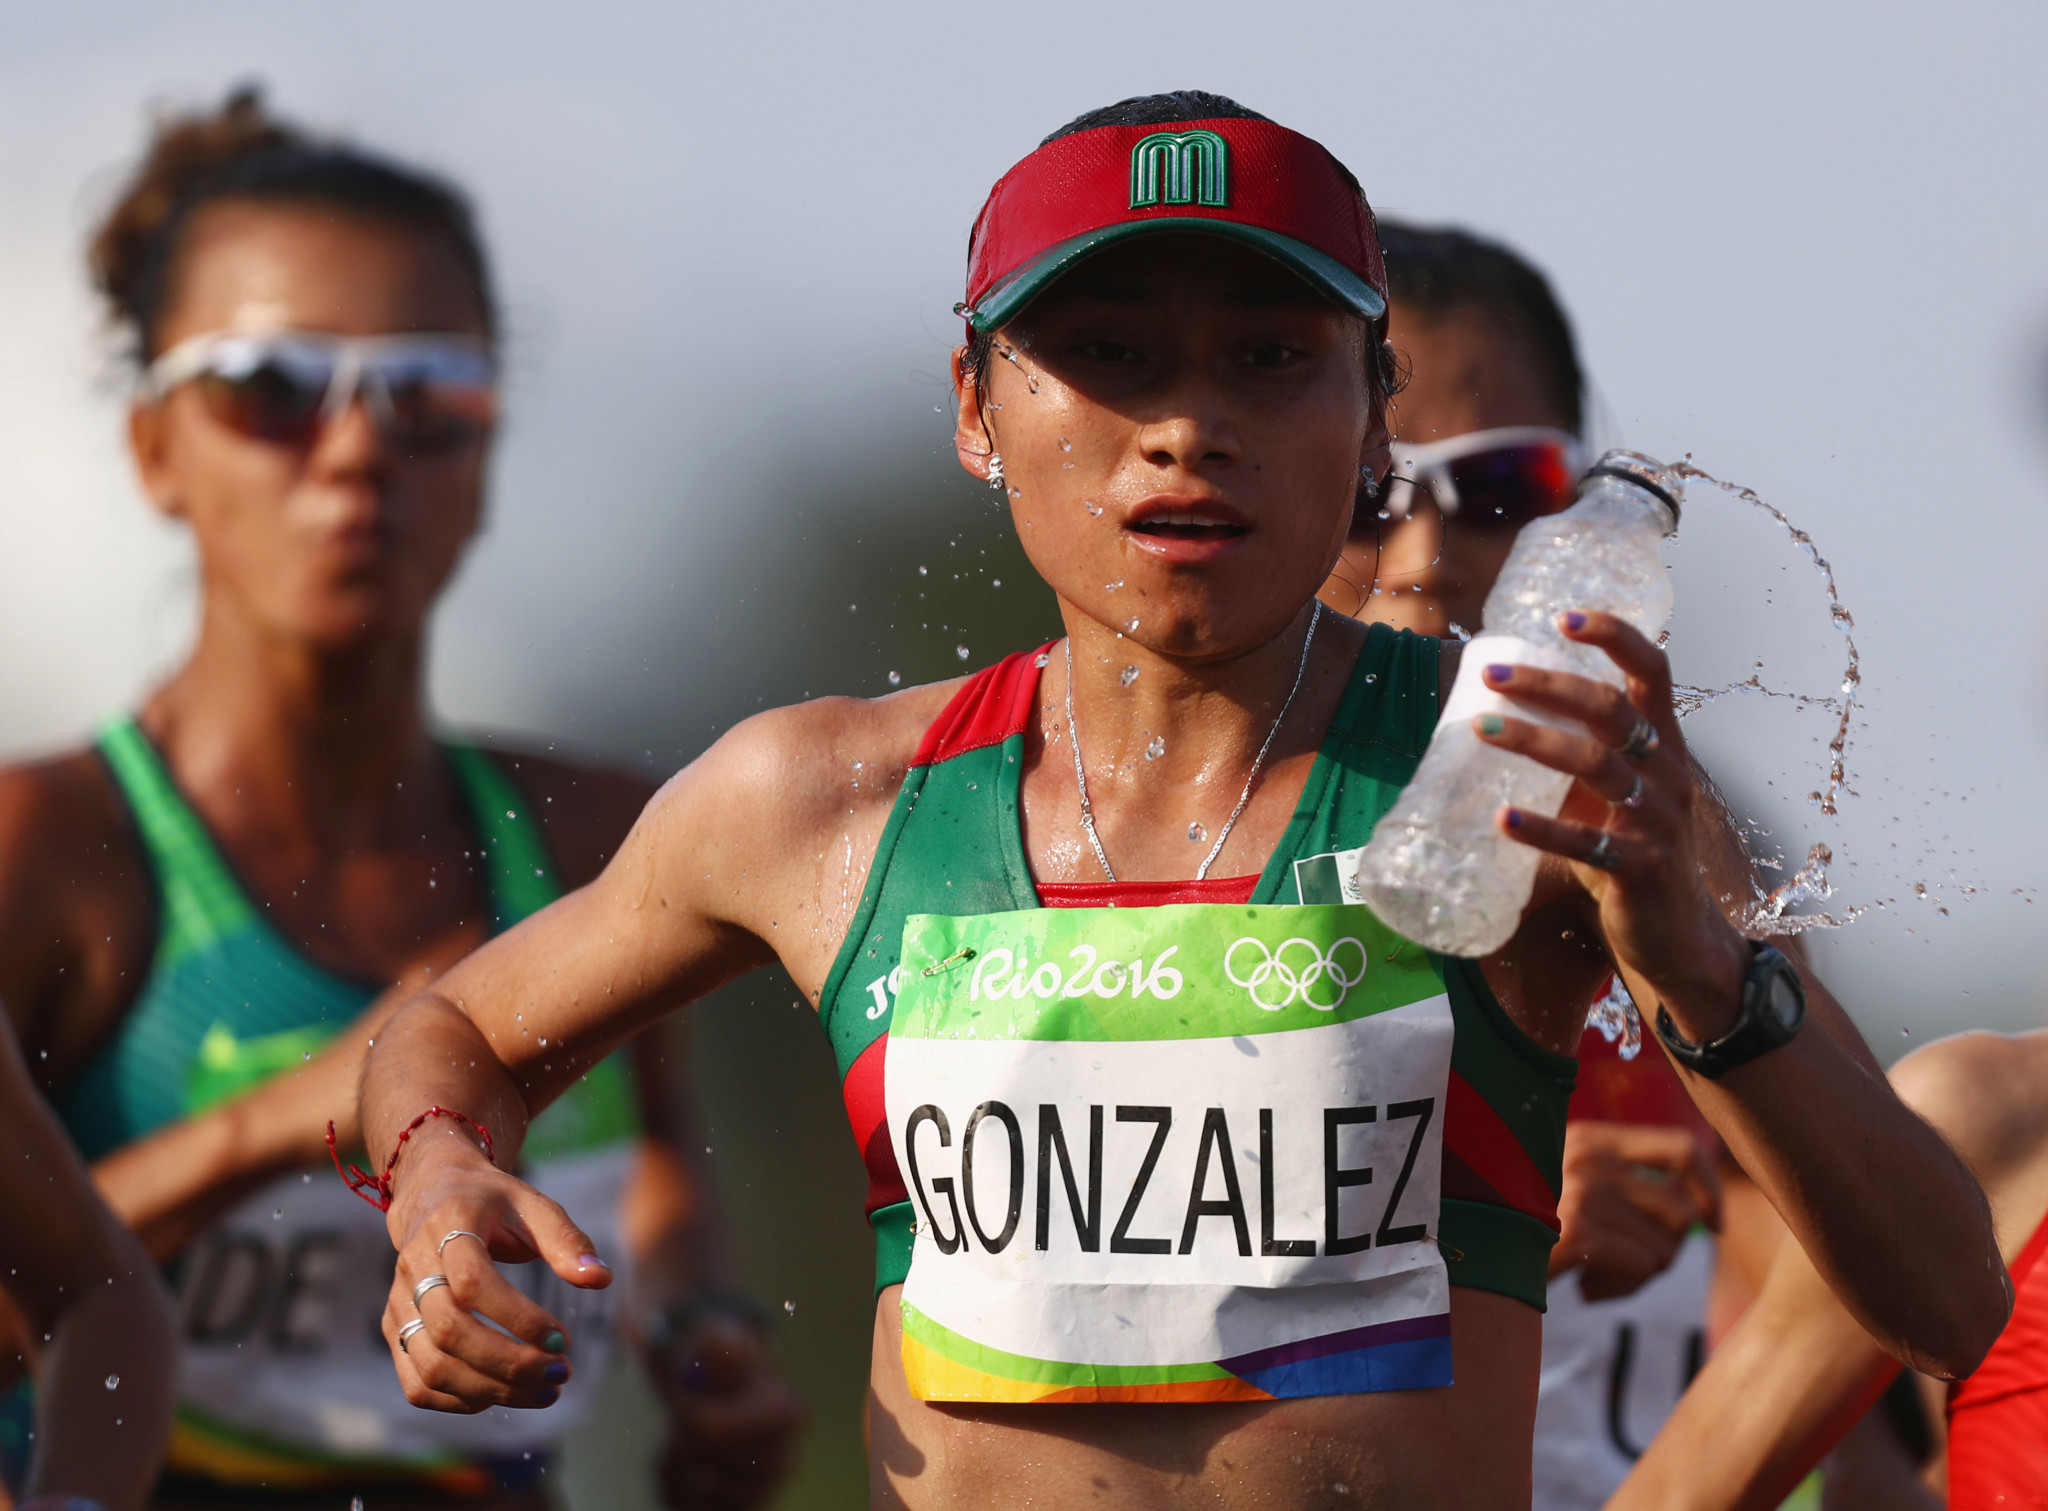 Olympic silver medallist María Guadalupe González Romero has failed in an appeal against her drugs ban ©Getty Images